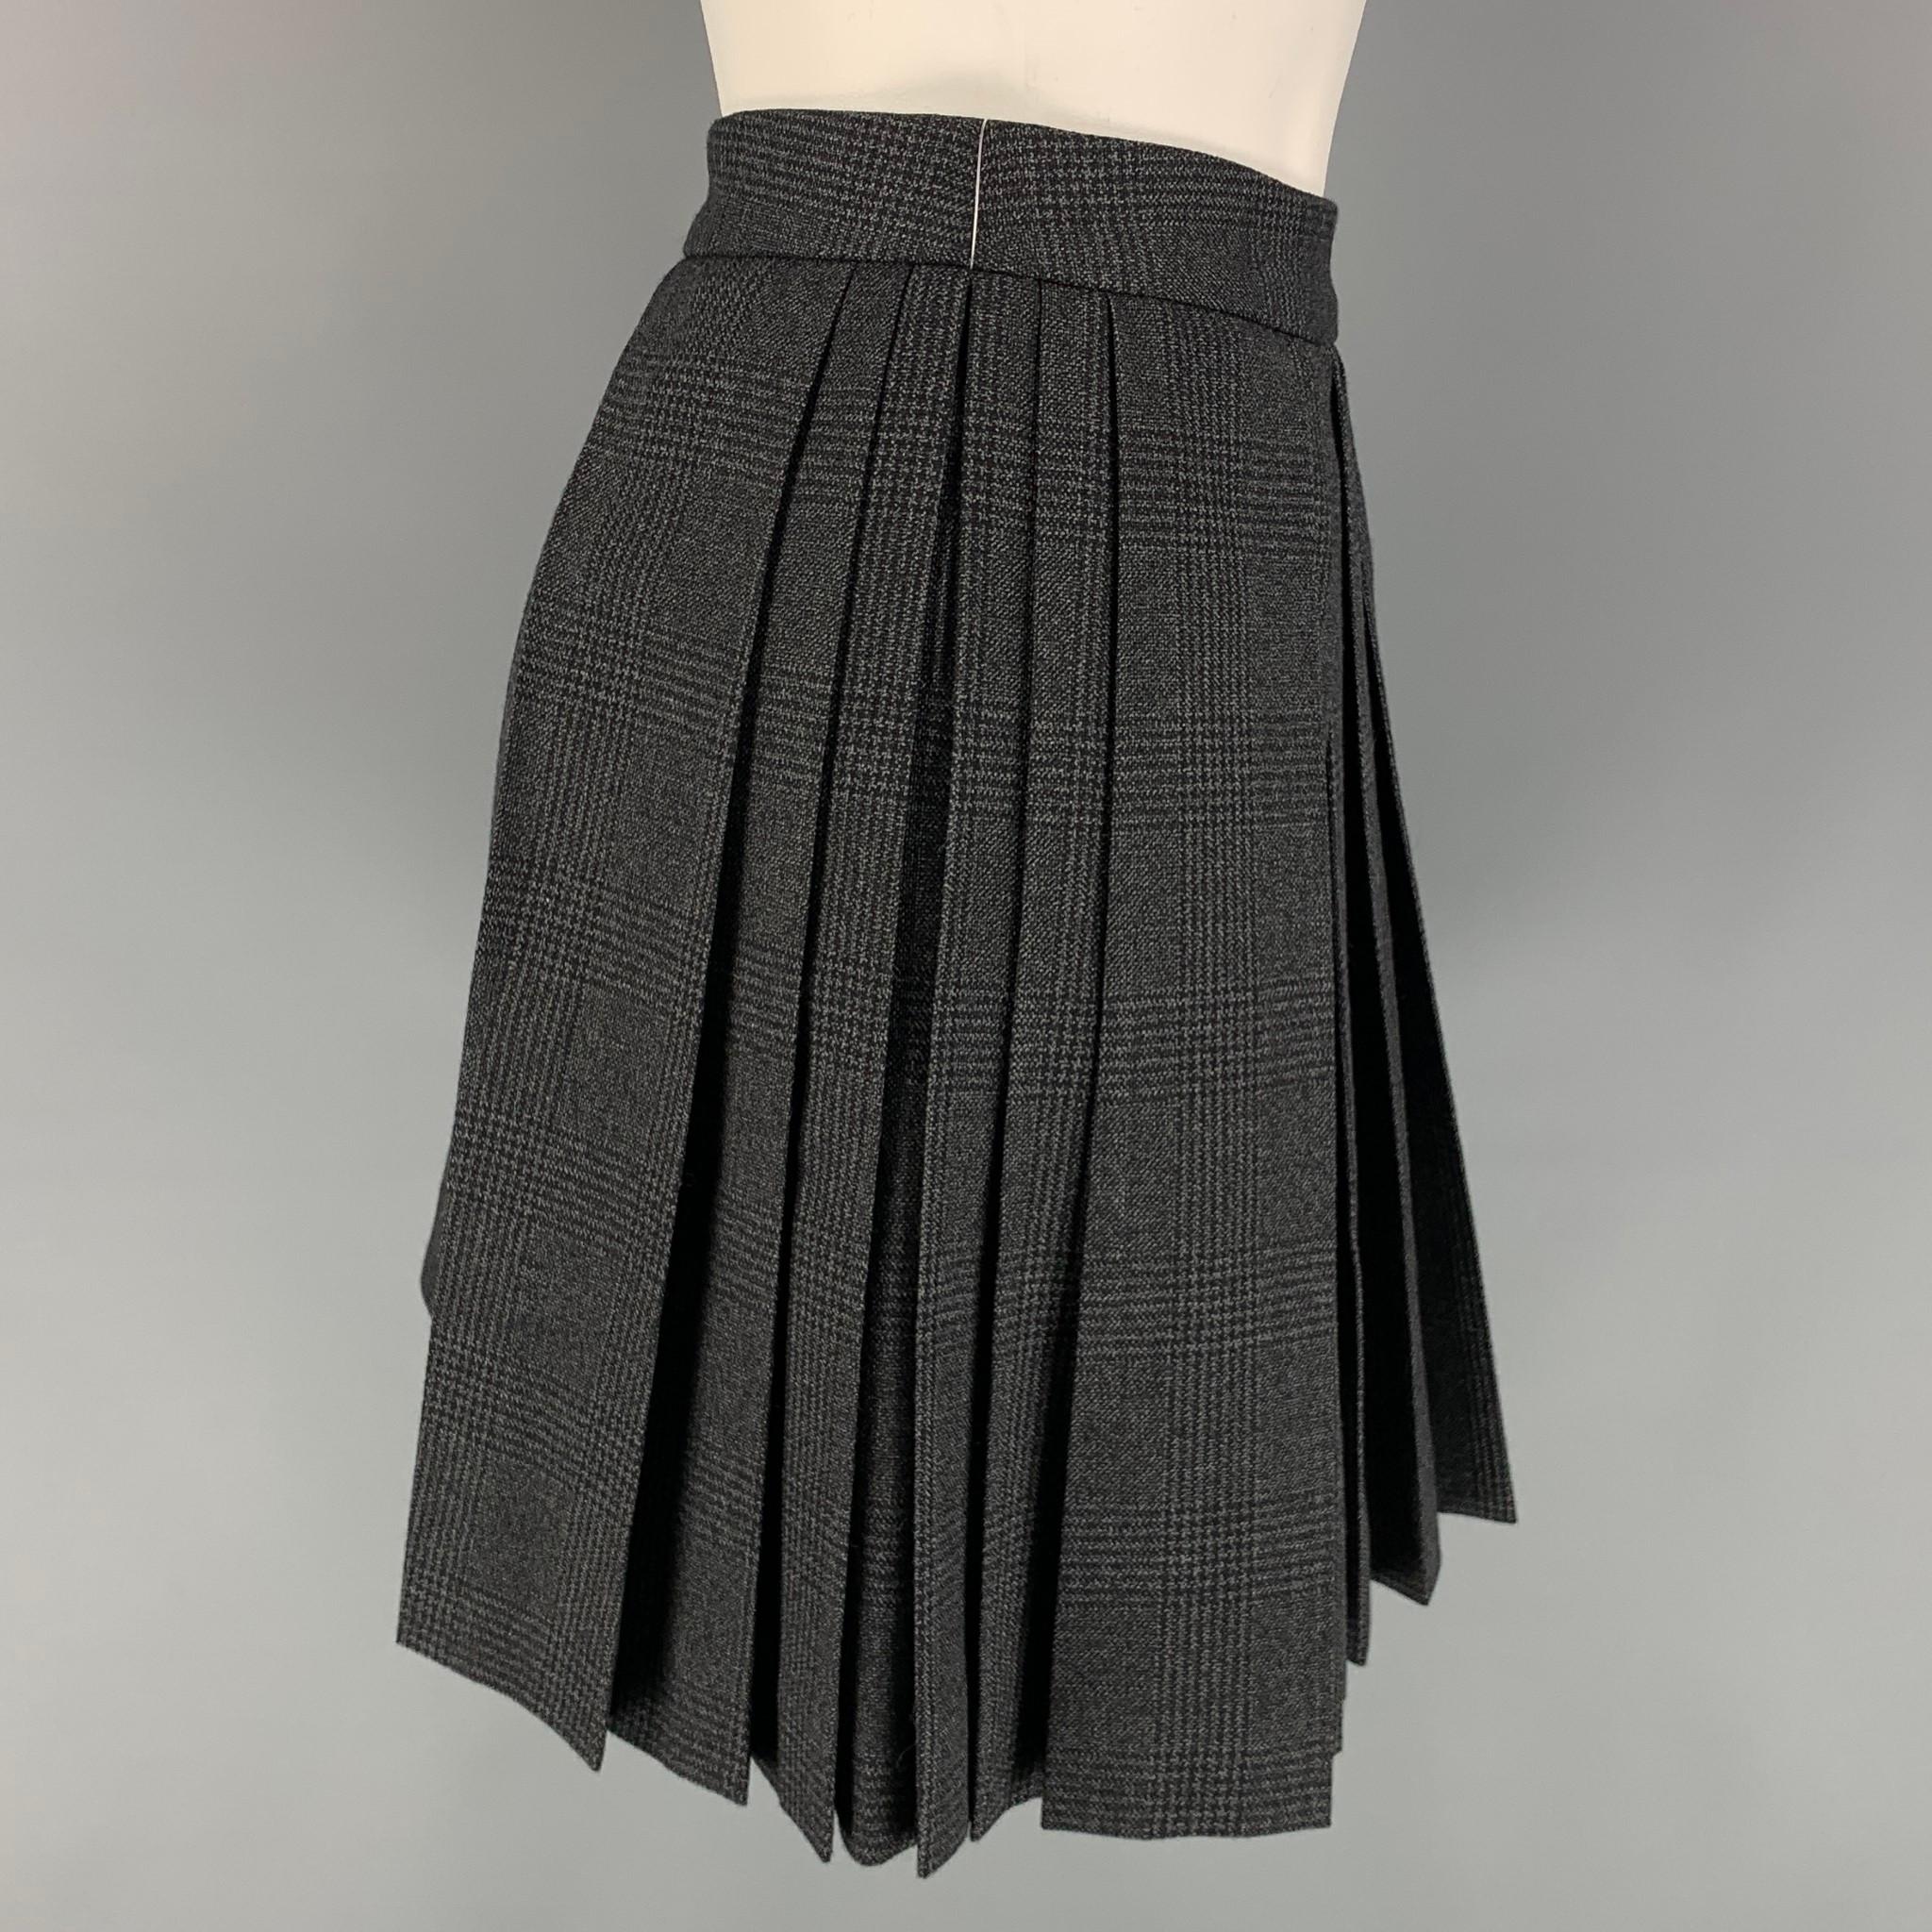 CELINE mini skirt comes in a charcoal plaid wool with a slip liner featuring a pleated style, and a side zip up closure. Made in Italy. 

Excellent Pre-Owned Condition.
Marked: 36
Original Retail Price: $1,350.00

Measurements:

Waist: 28 in.
Hip: